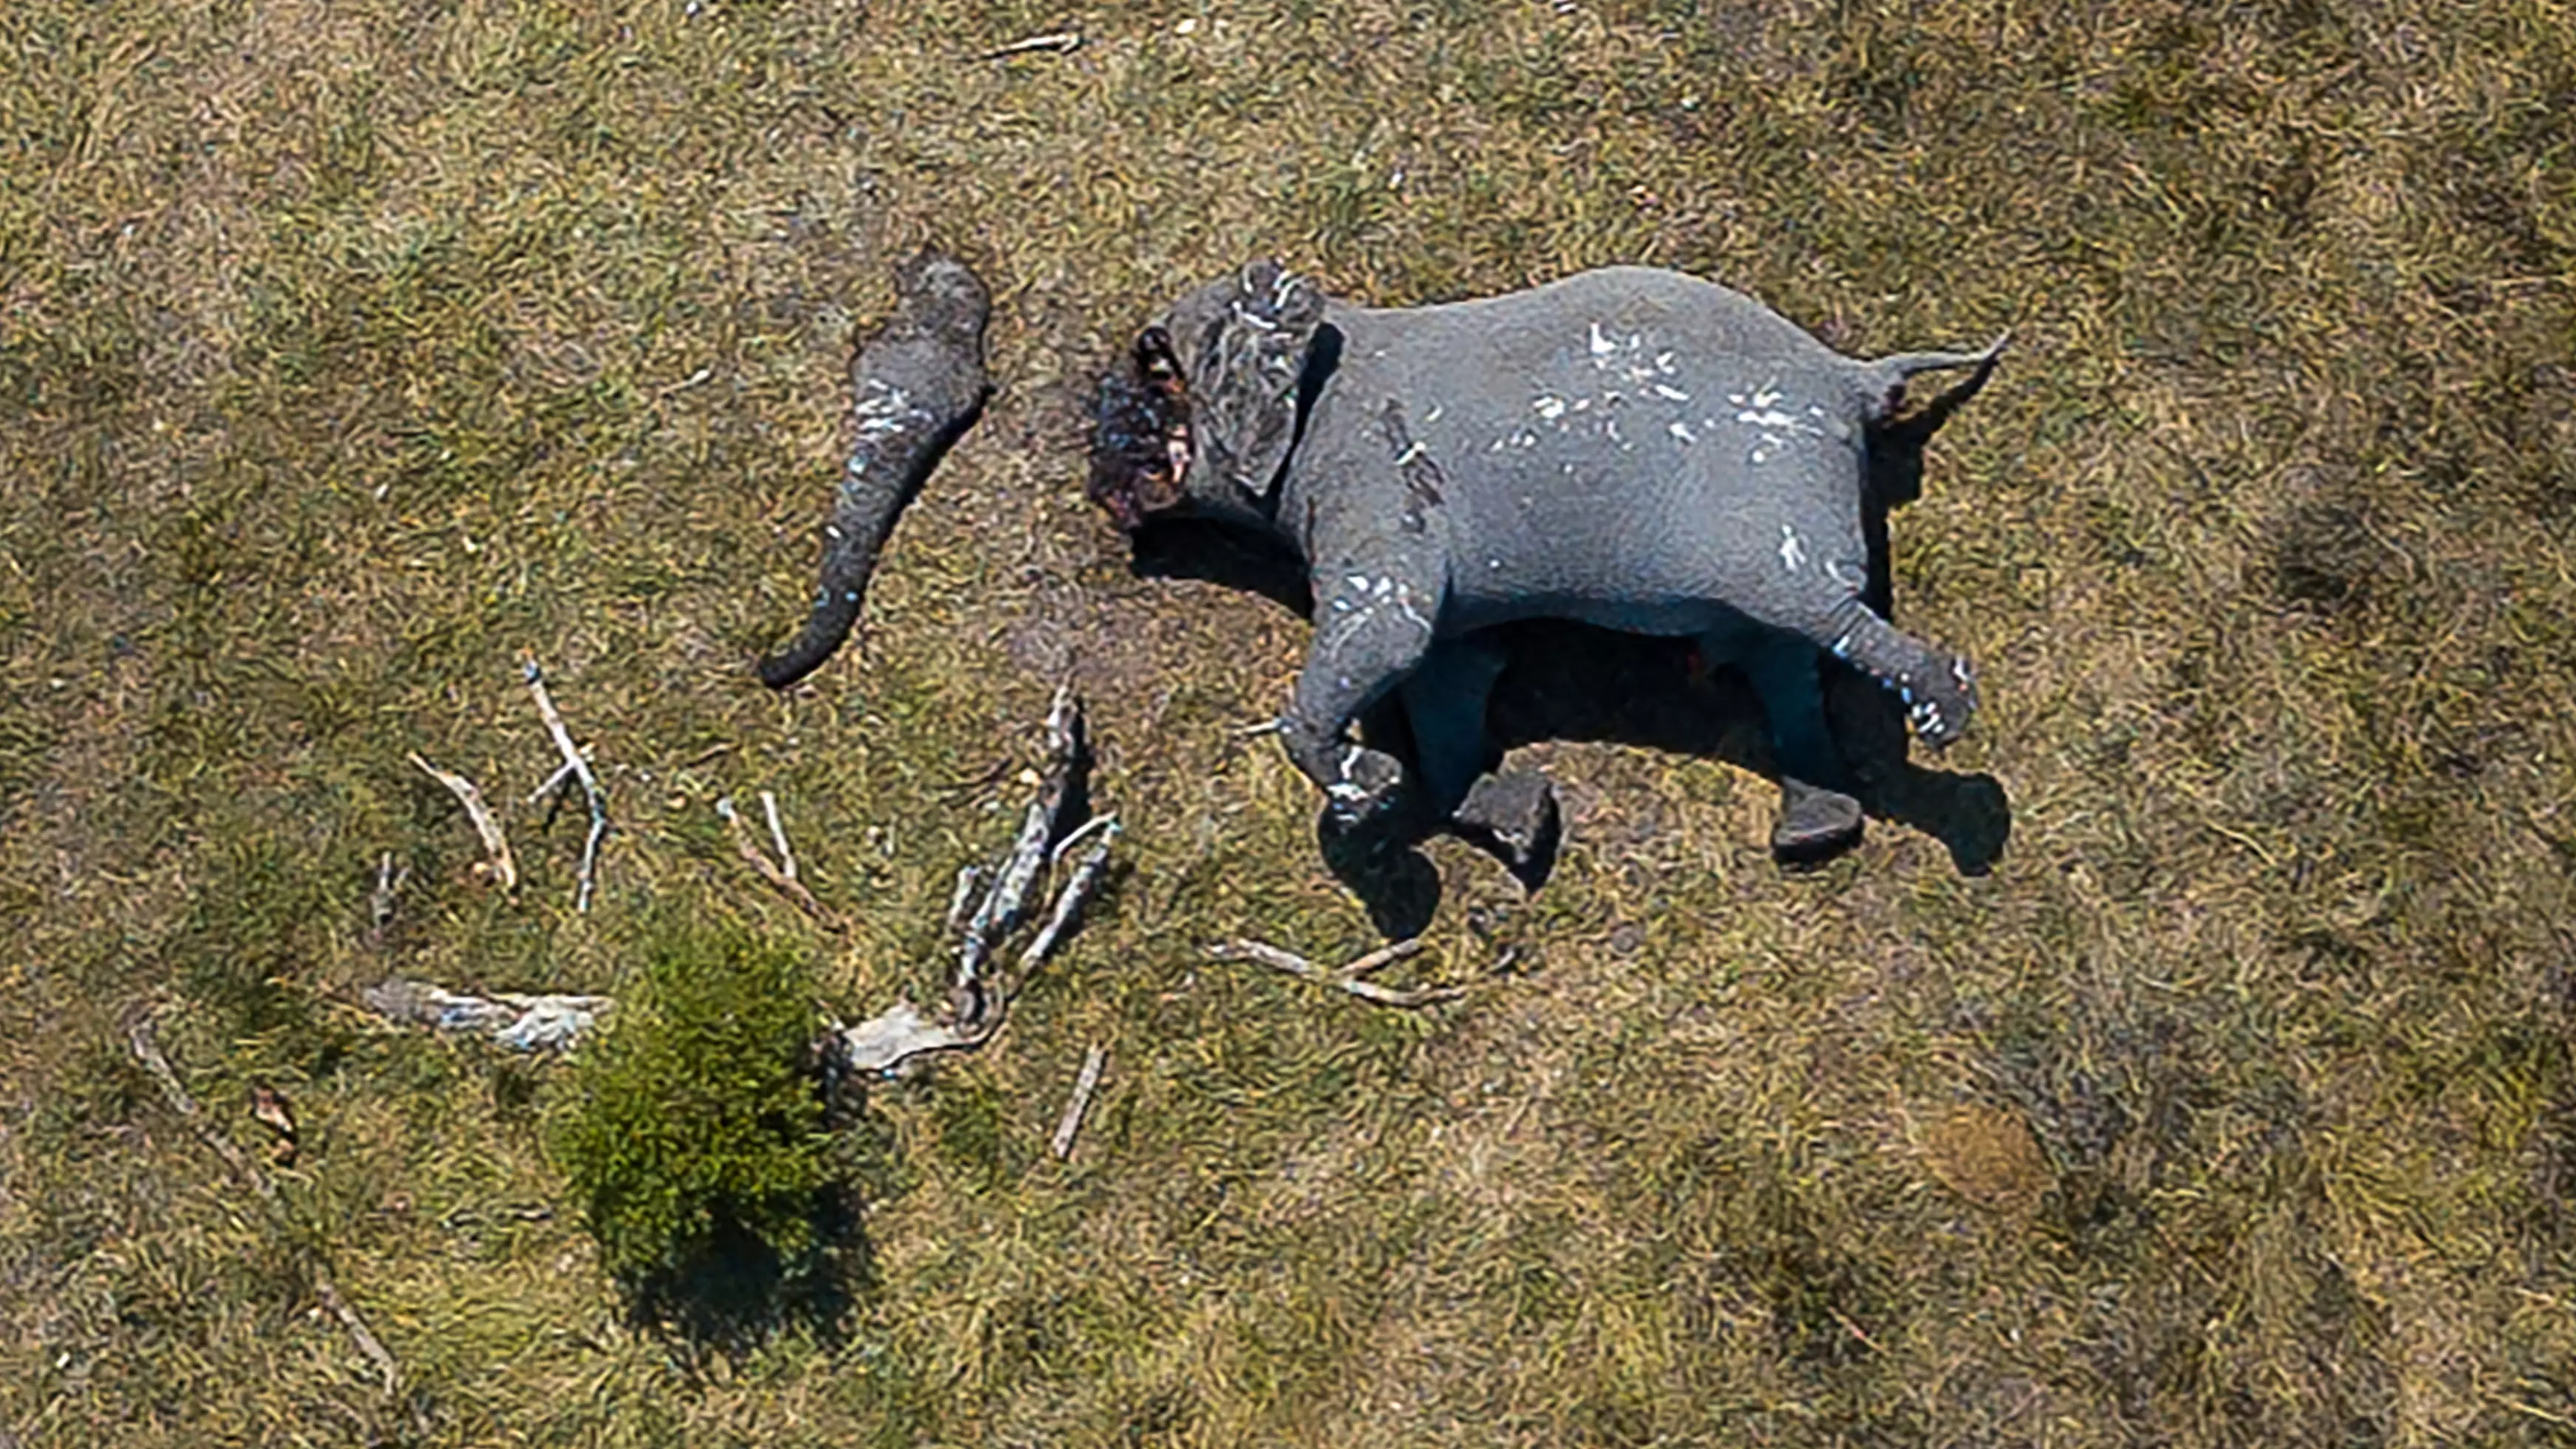 Horrifying Image Shows African Elephant With Its Trunk And Tusks Cut Off By Poachers